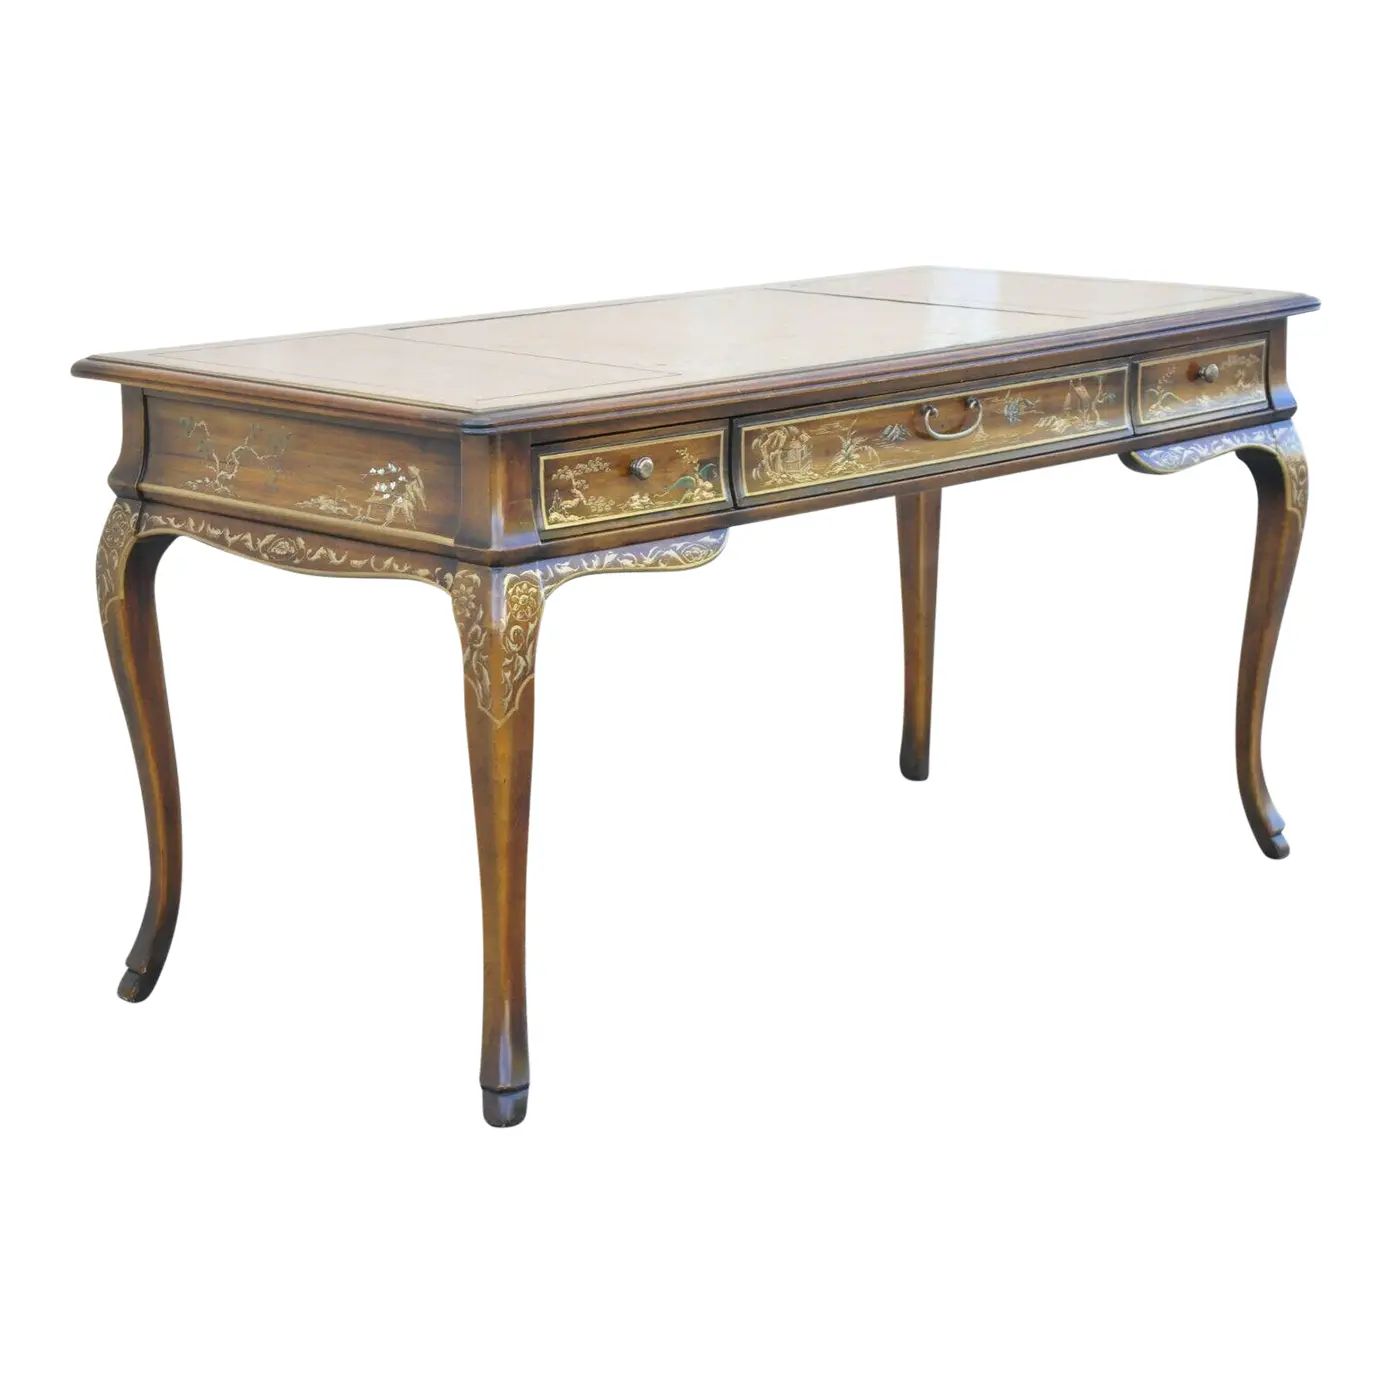 Vintage Drexel Et Cetera Chinoiserie Leather Top Hand Painted Writing Desk | Chairish